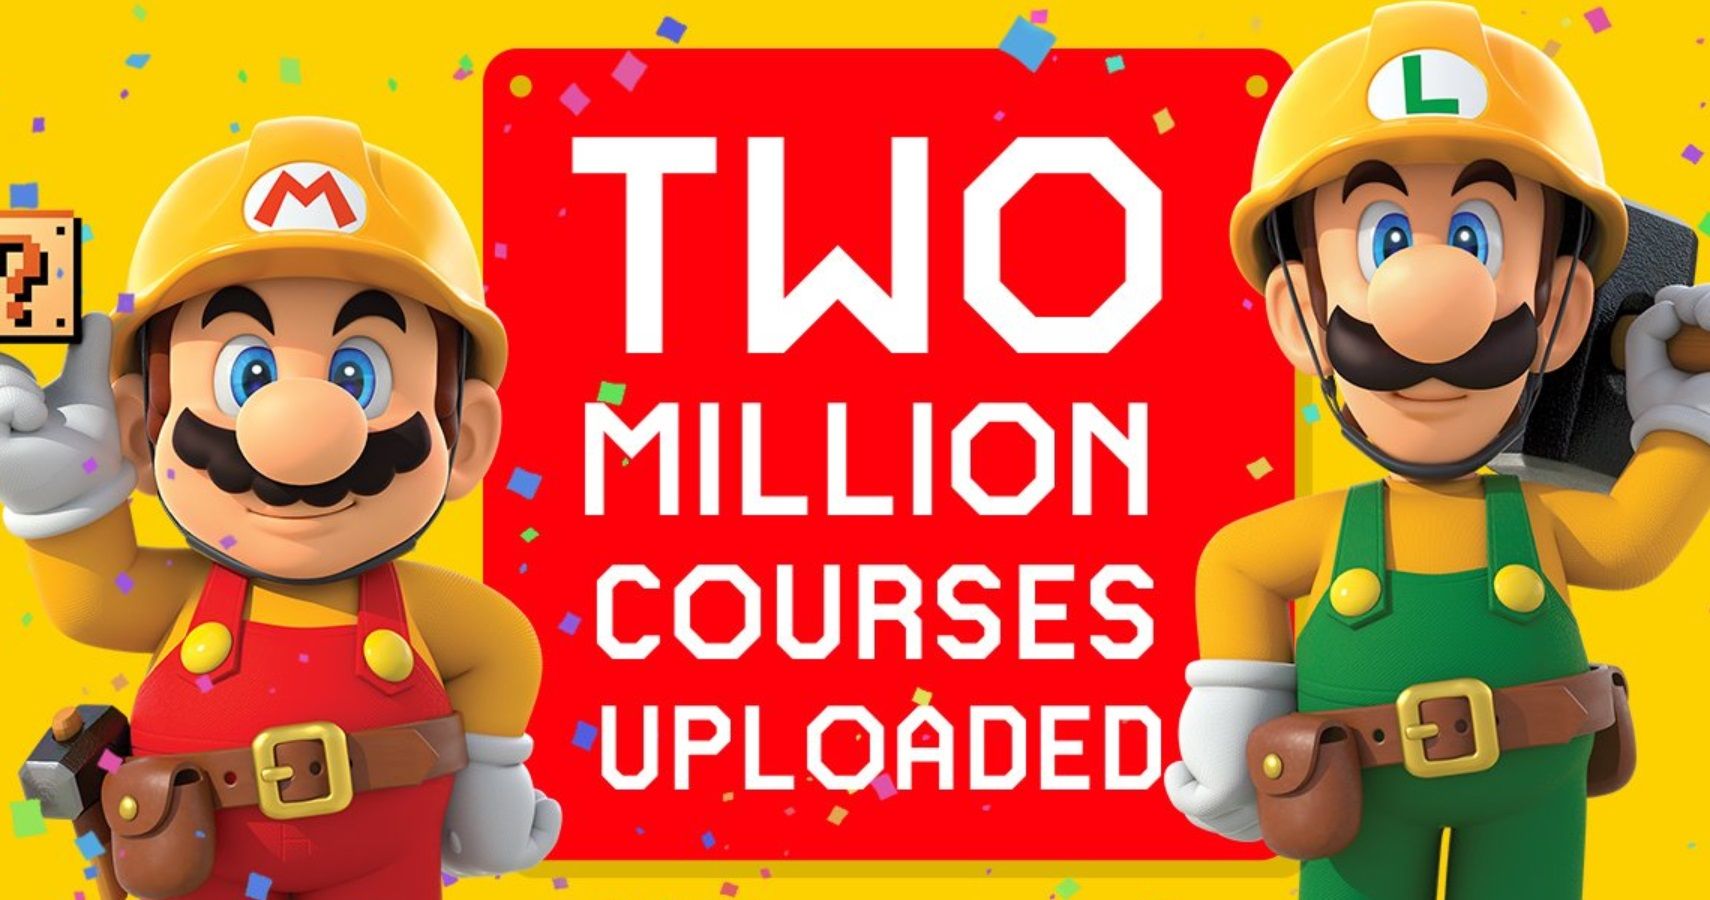 Super Mario Maker 2 Players Have Already Uploaded Over 2 Million Levels